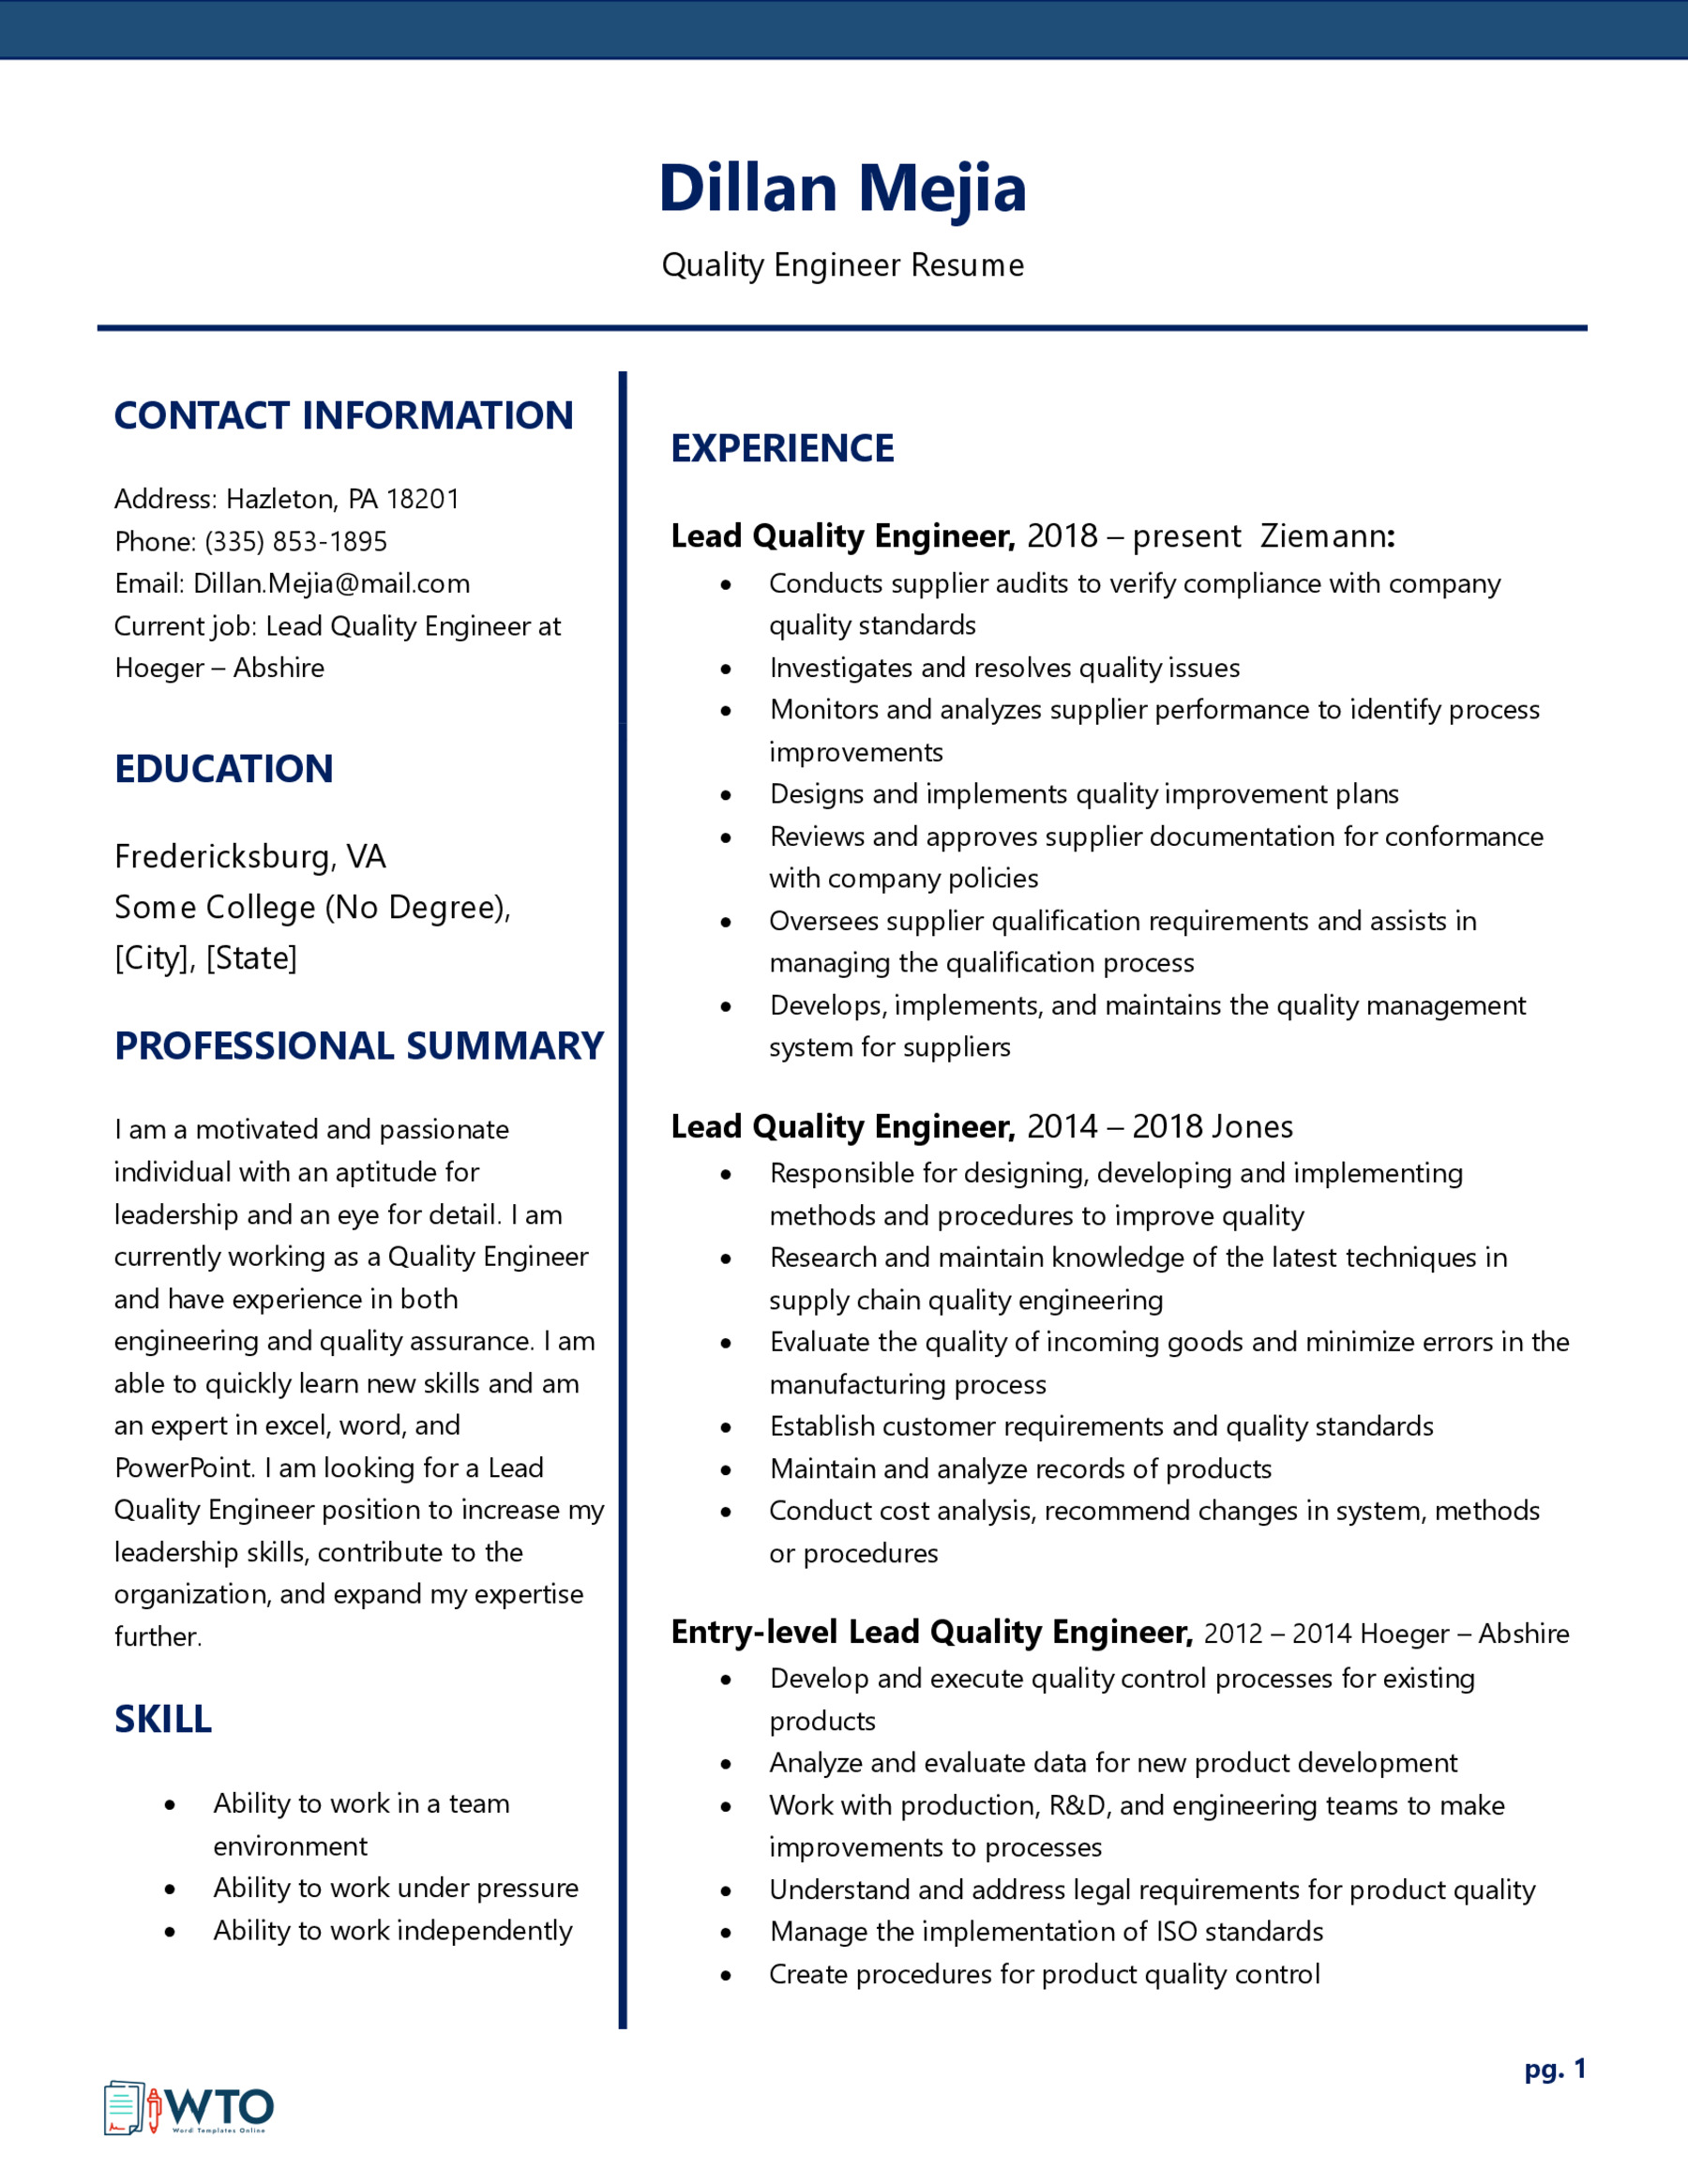 Downloadable Quality Engineer Resume Template - Word Format